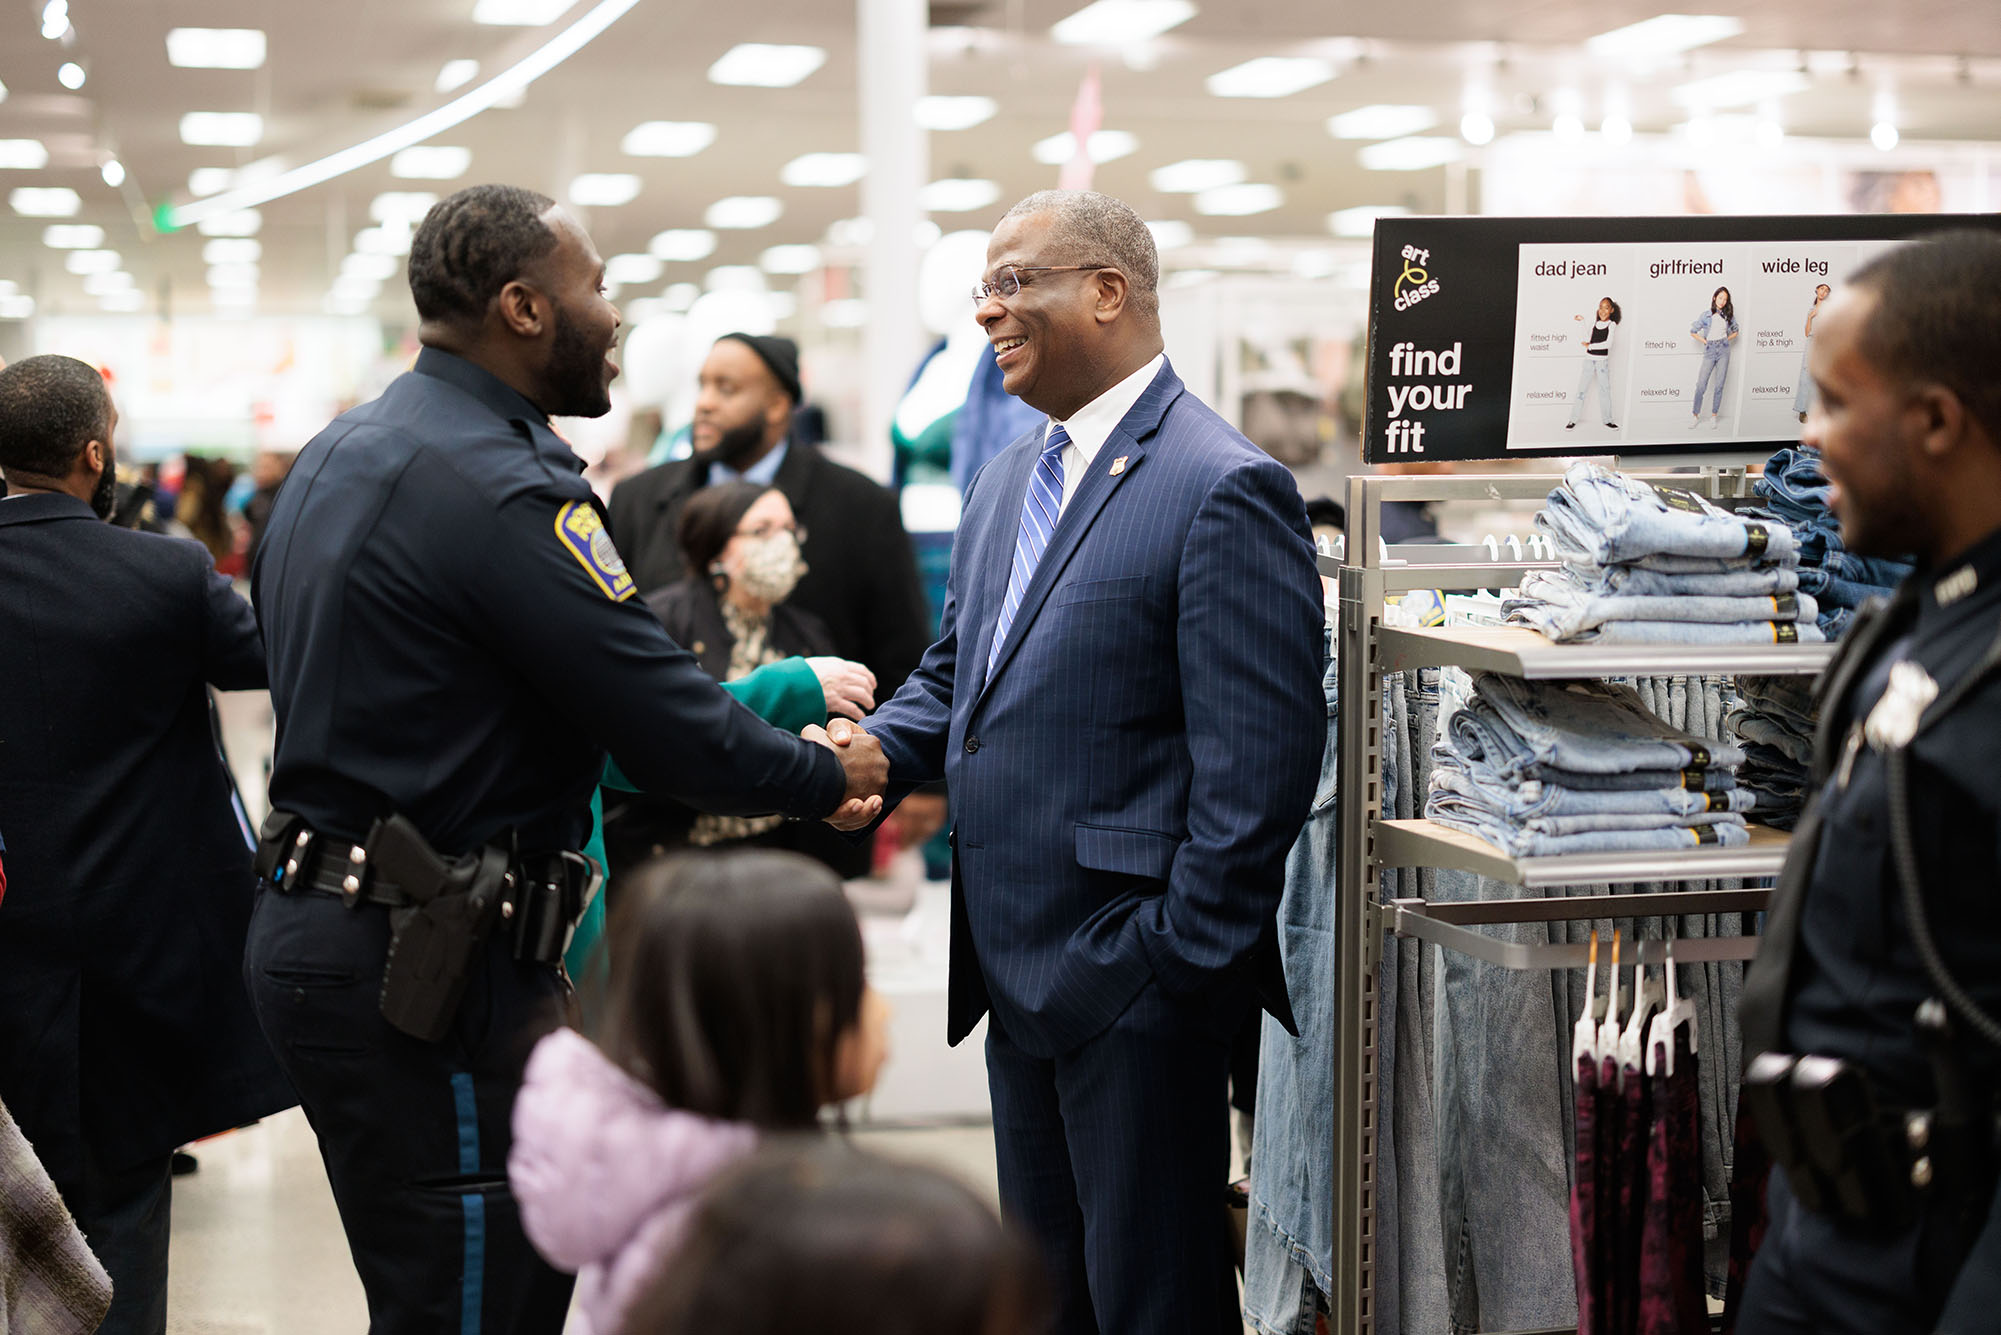 Photo: Al Colbourne, B2 Officer, left, and Xavier Hill, C6 Officer, right, speak to newly appointed police commissioner Michael Cox, middle, at the 11th annual "Shop with a Cop" event at Target in the South Bay shopping plaza in Dorchester on December 13th. One Black man in a Boston police officer uniform shakes hands with another Black man wearing glasses, a navy blue suit, and lighter blue striped tie. They both smile as various other people of color look on. Another Black officer in uniform looks on from the right.